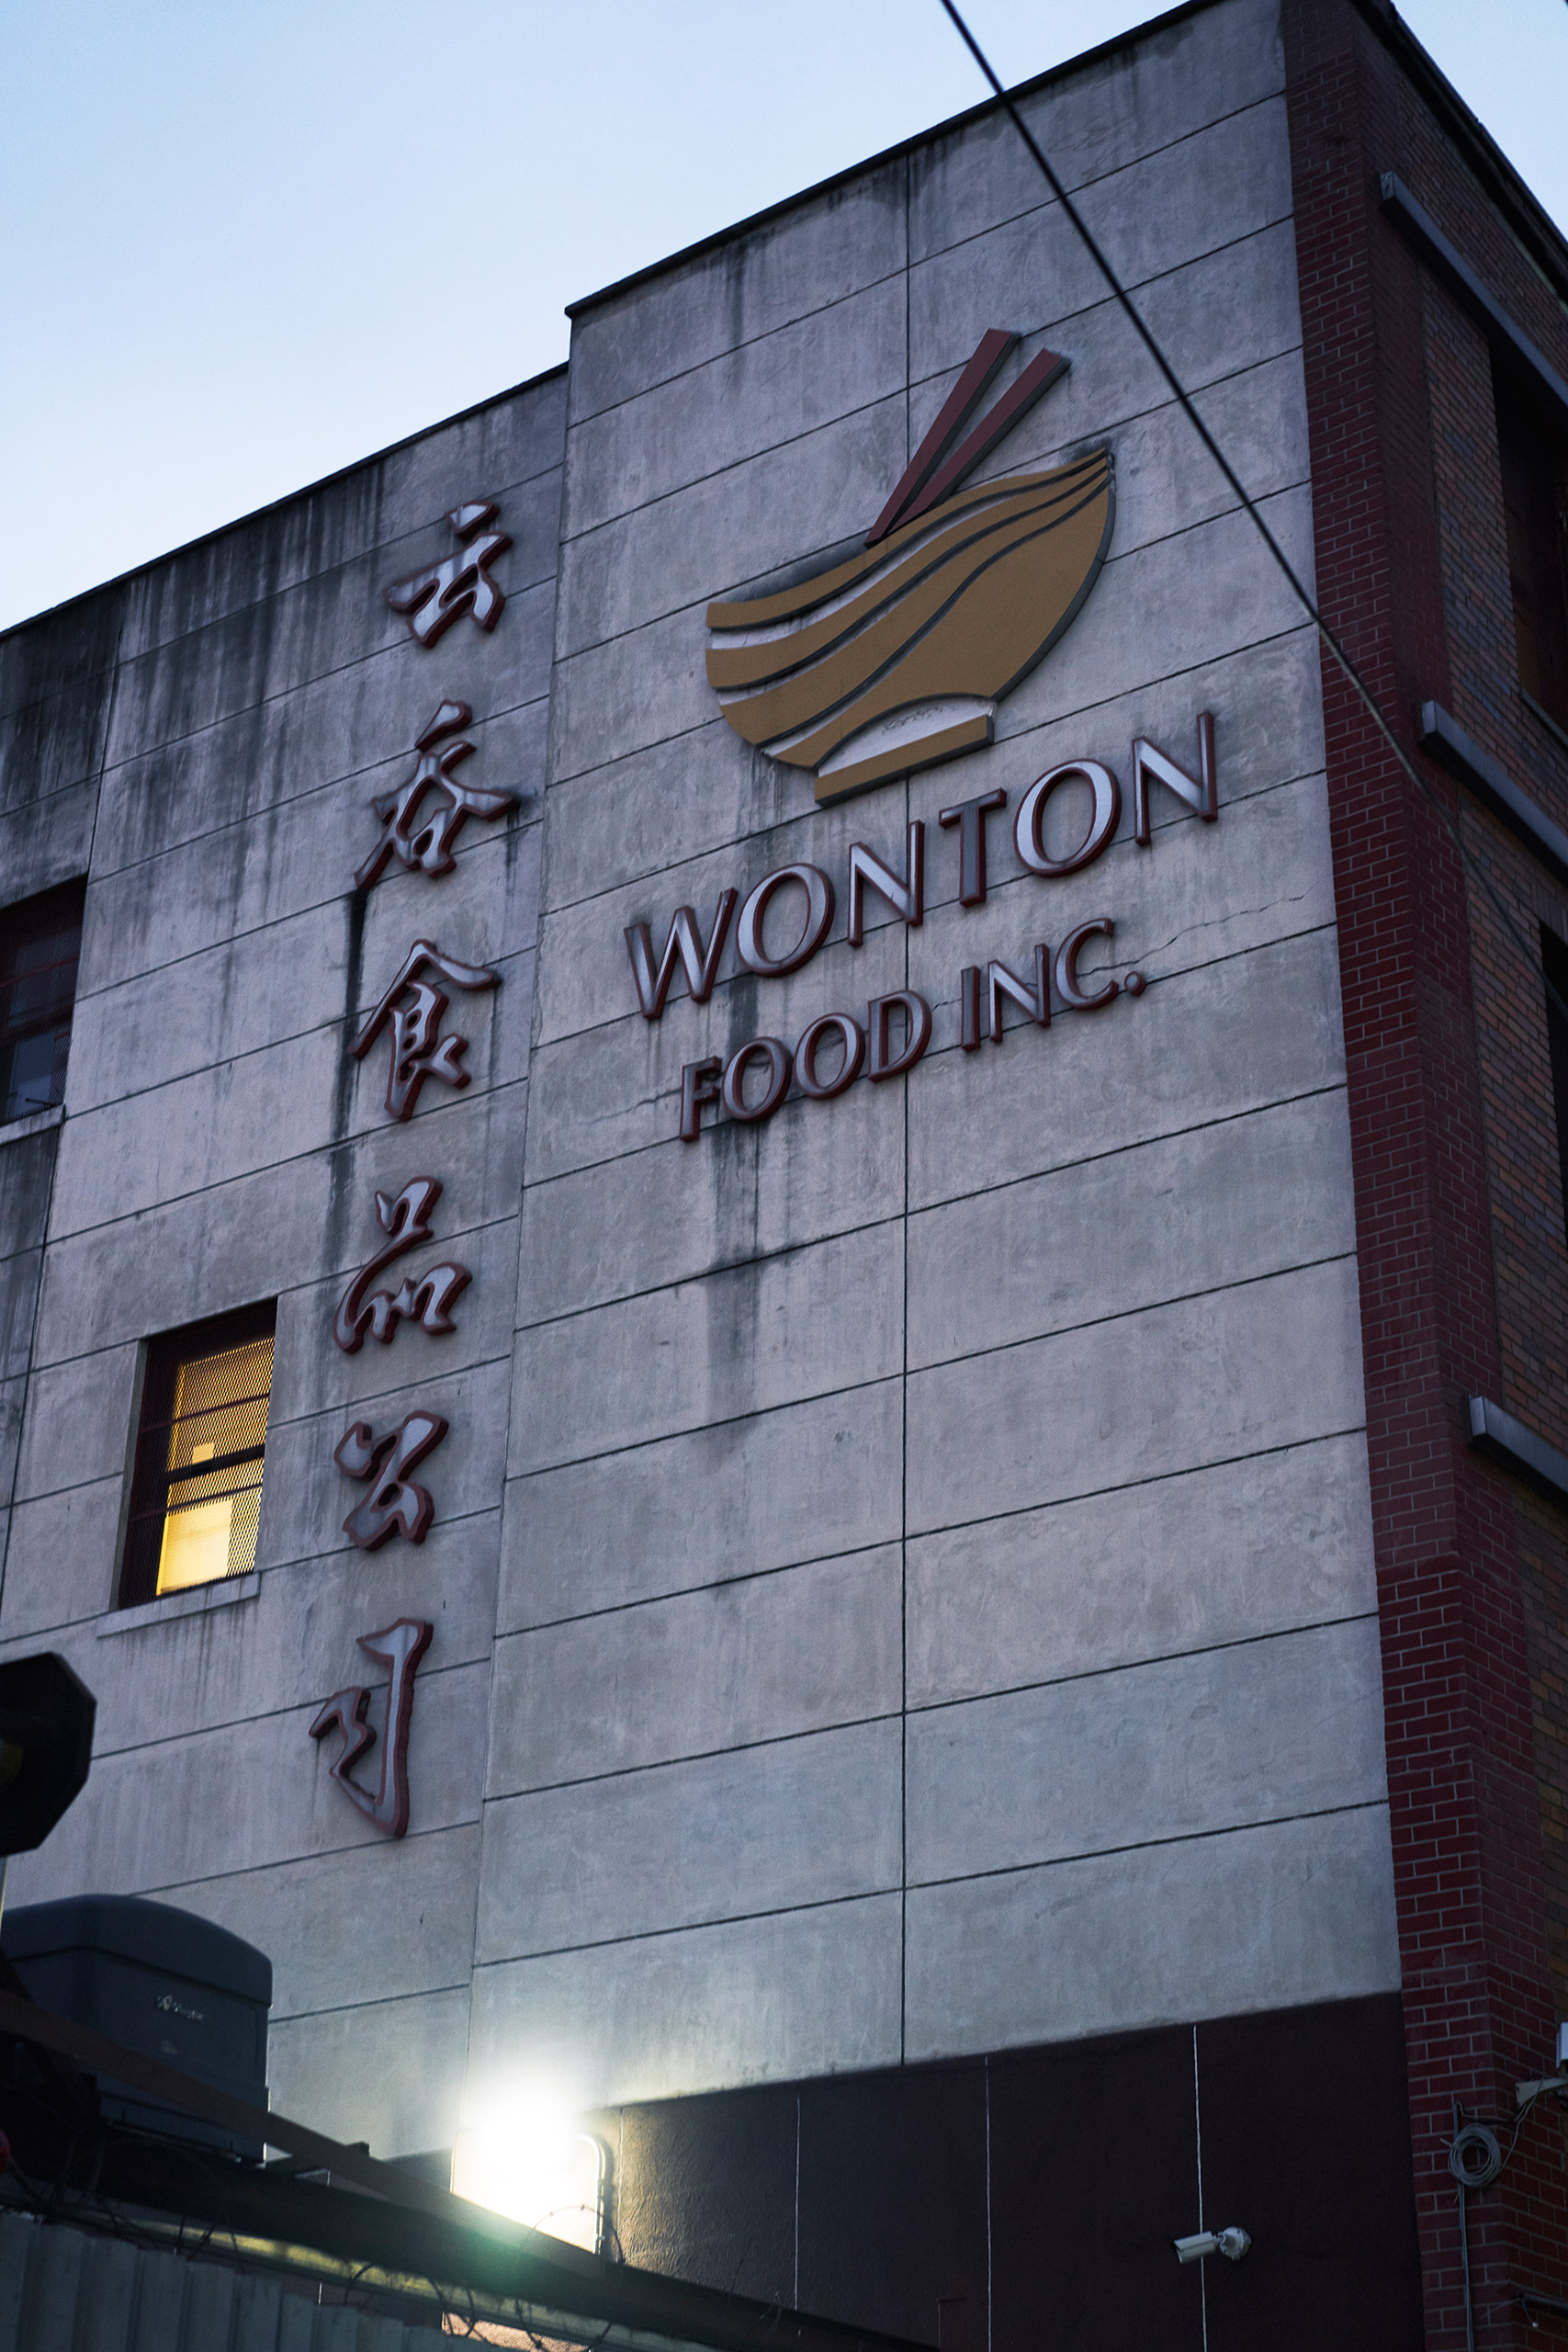 Exterior of the fortune cookie manufacturing plant of Wonton Food Inc. Brooklyn, N.Y. Jan. 18, 2017.